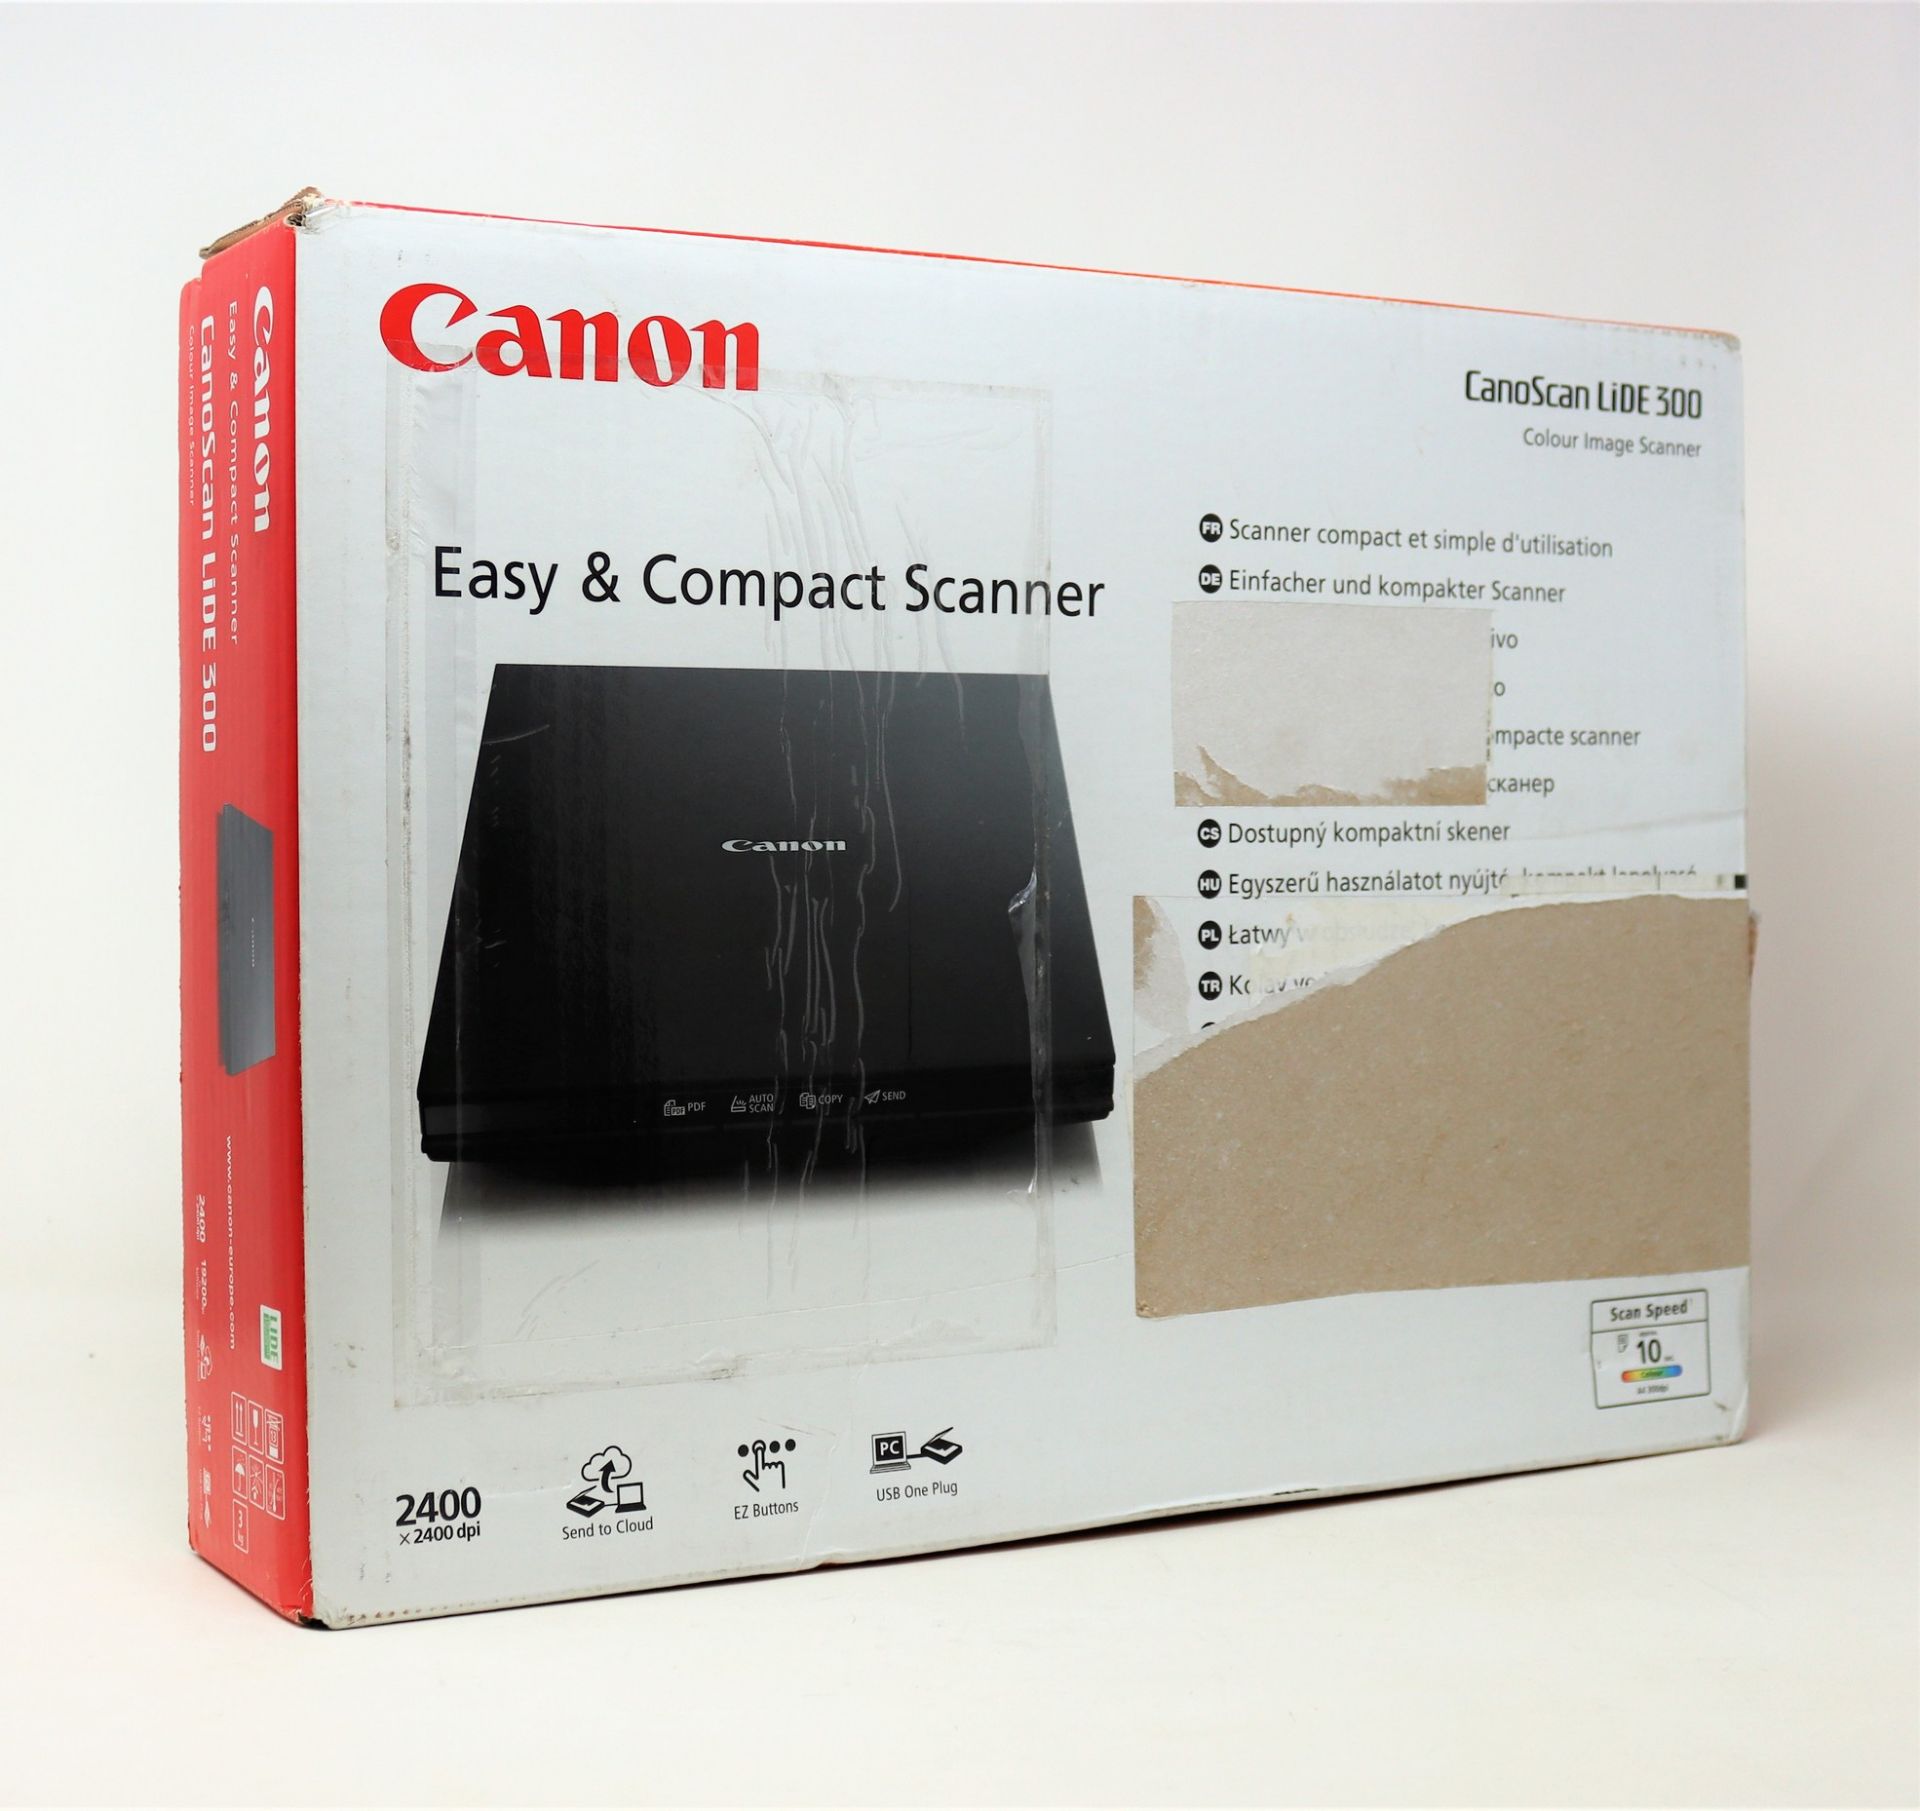 A boxed as new Canon CanoScan LiDE 300 Flatbed Scanner (Box opened, some damage to box).